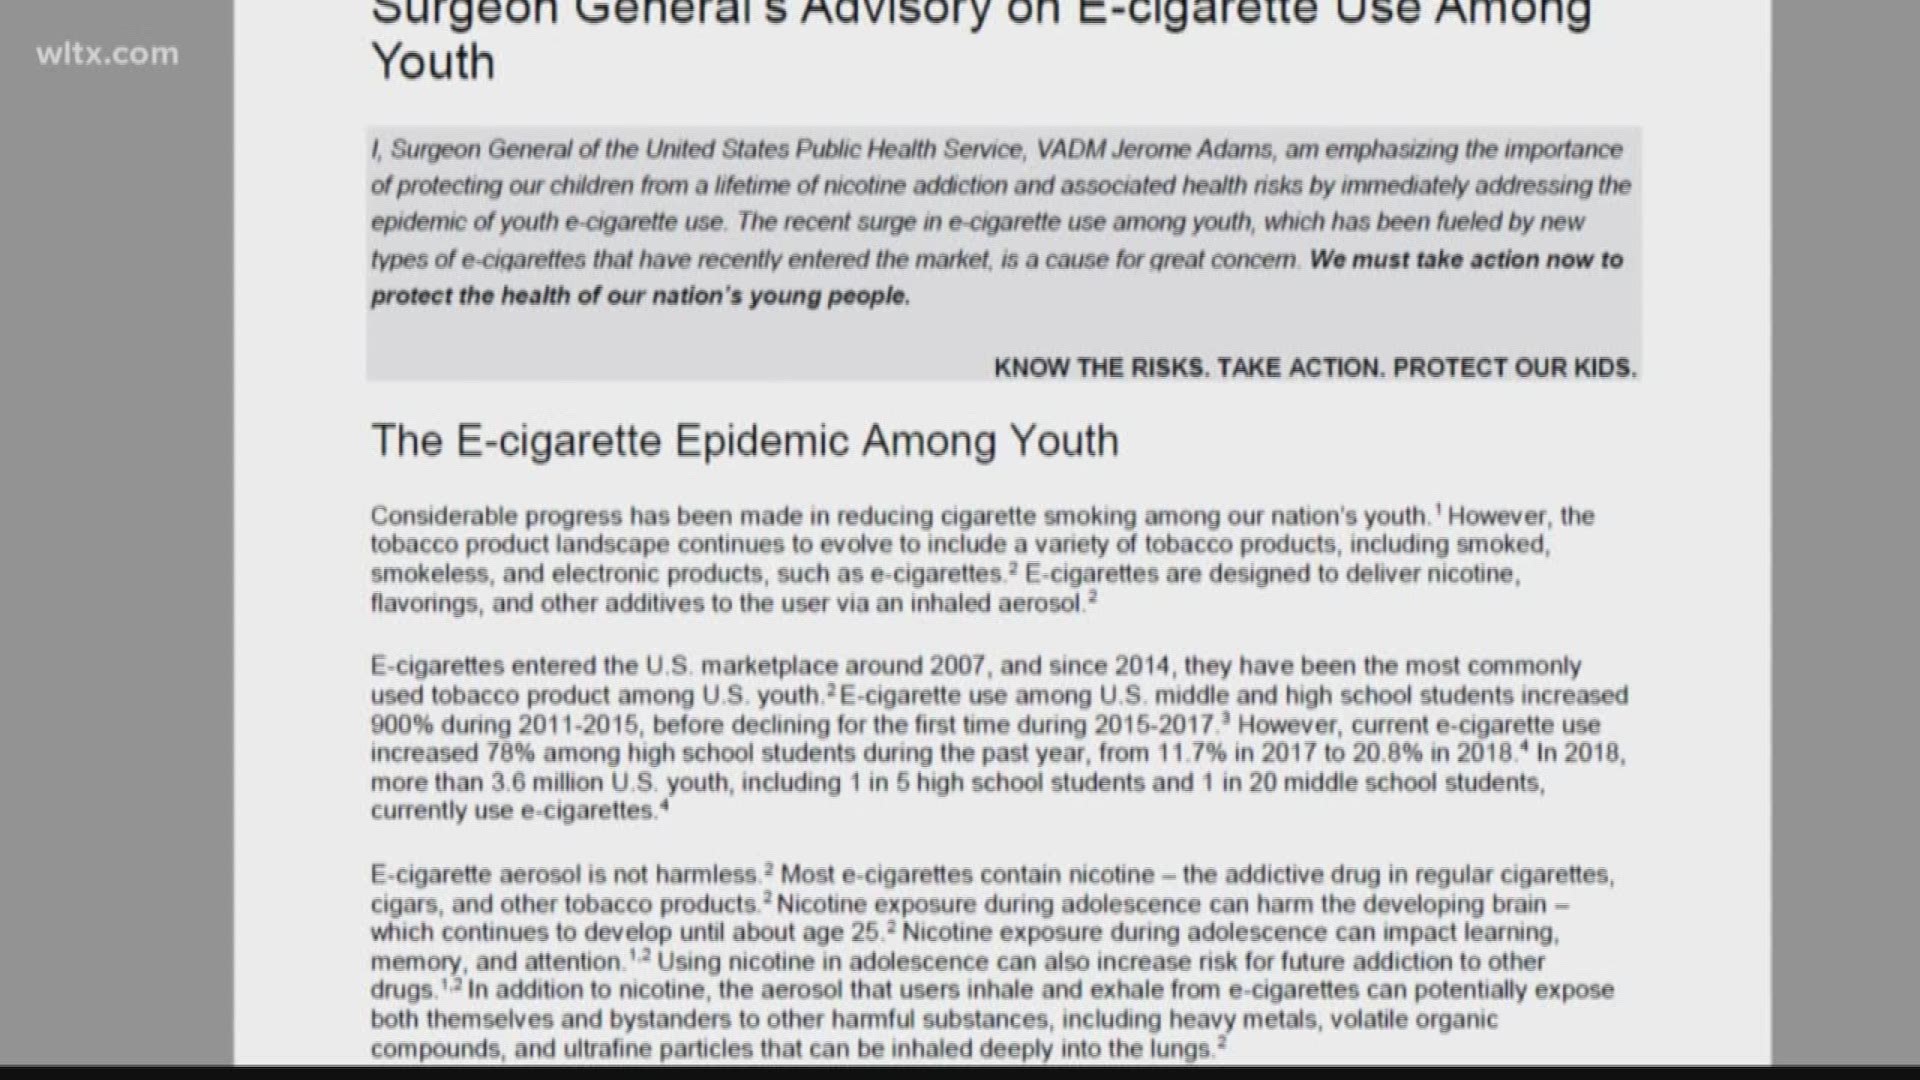 Four bills trying to make it harder for young people to get access to e-cigarettes and vaping products, passed a major hurdle today as they were approved out of a judiciary subcommittee.